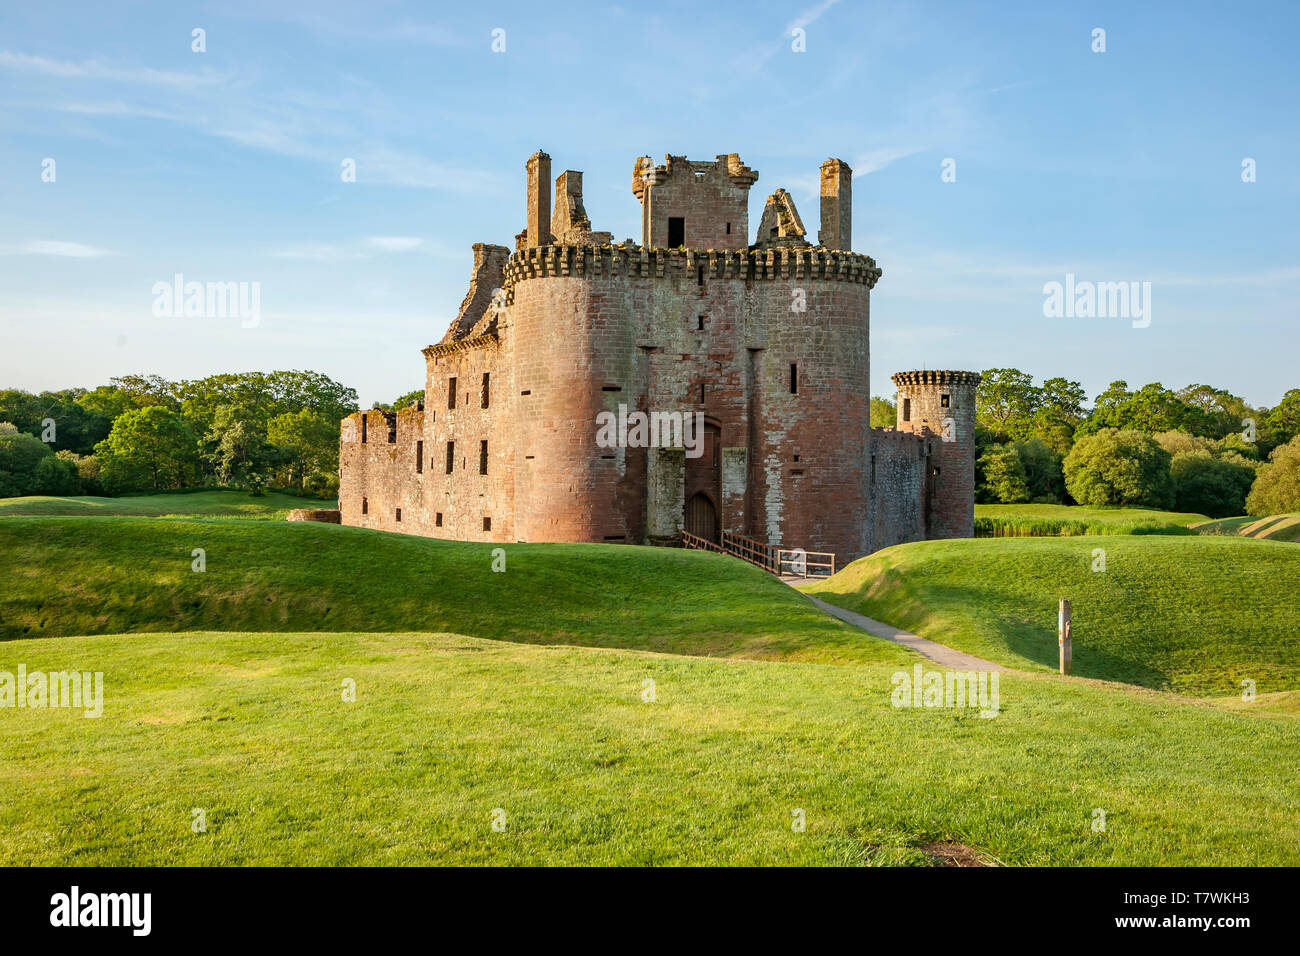 Caerlaverock Castle-Caerlaverock Castle is a moated triangular castle first built in the 13th century. It is located on the southern coast of Scotland Stock Photo